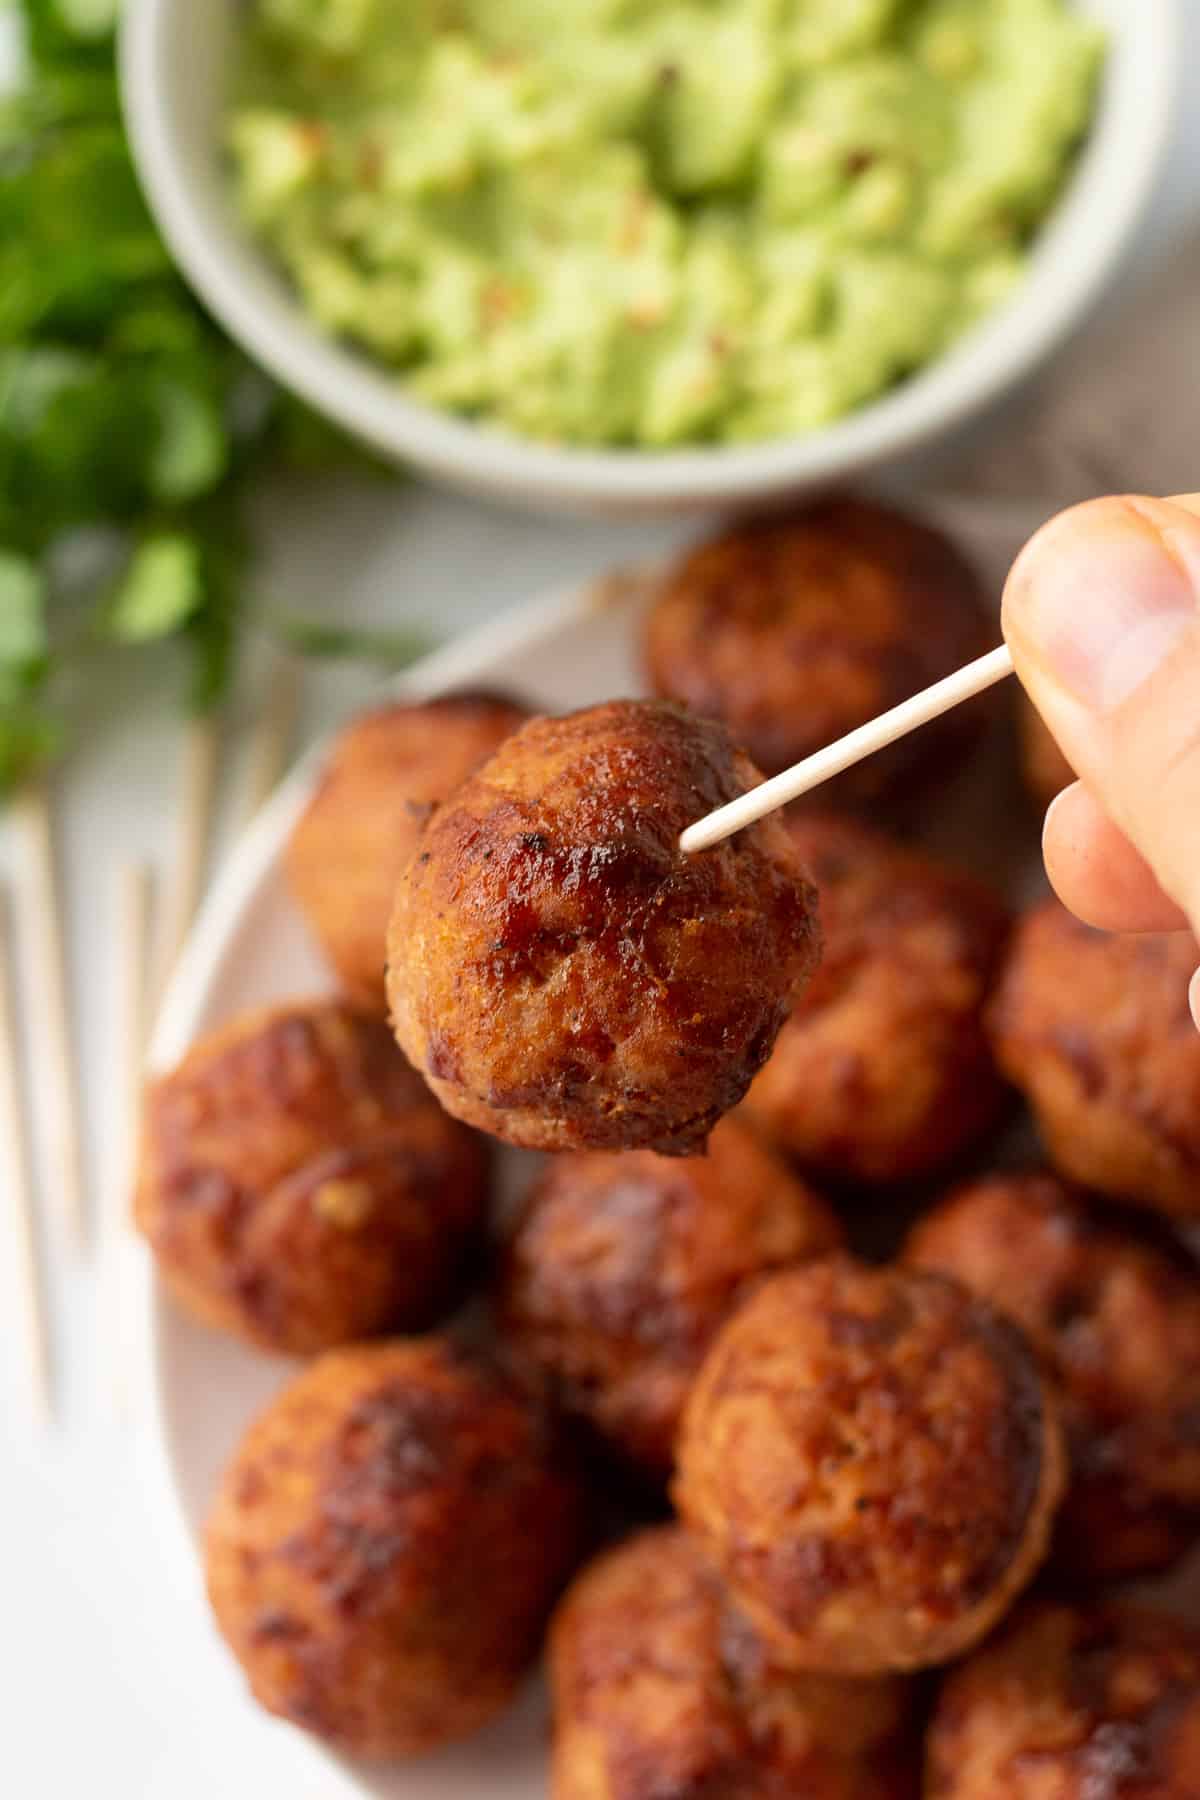 a hand holding a toothpick with a bbq turkey meatball on it. A plate of meatballs are in the background, with other toothpicks, greens, and a bowl of guacamole.